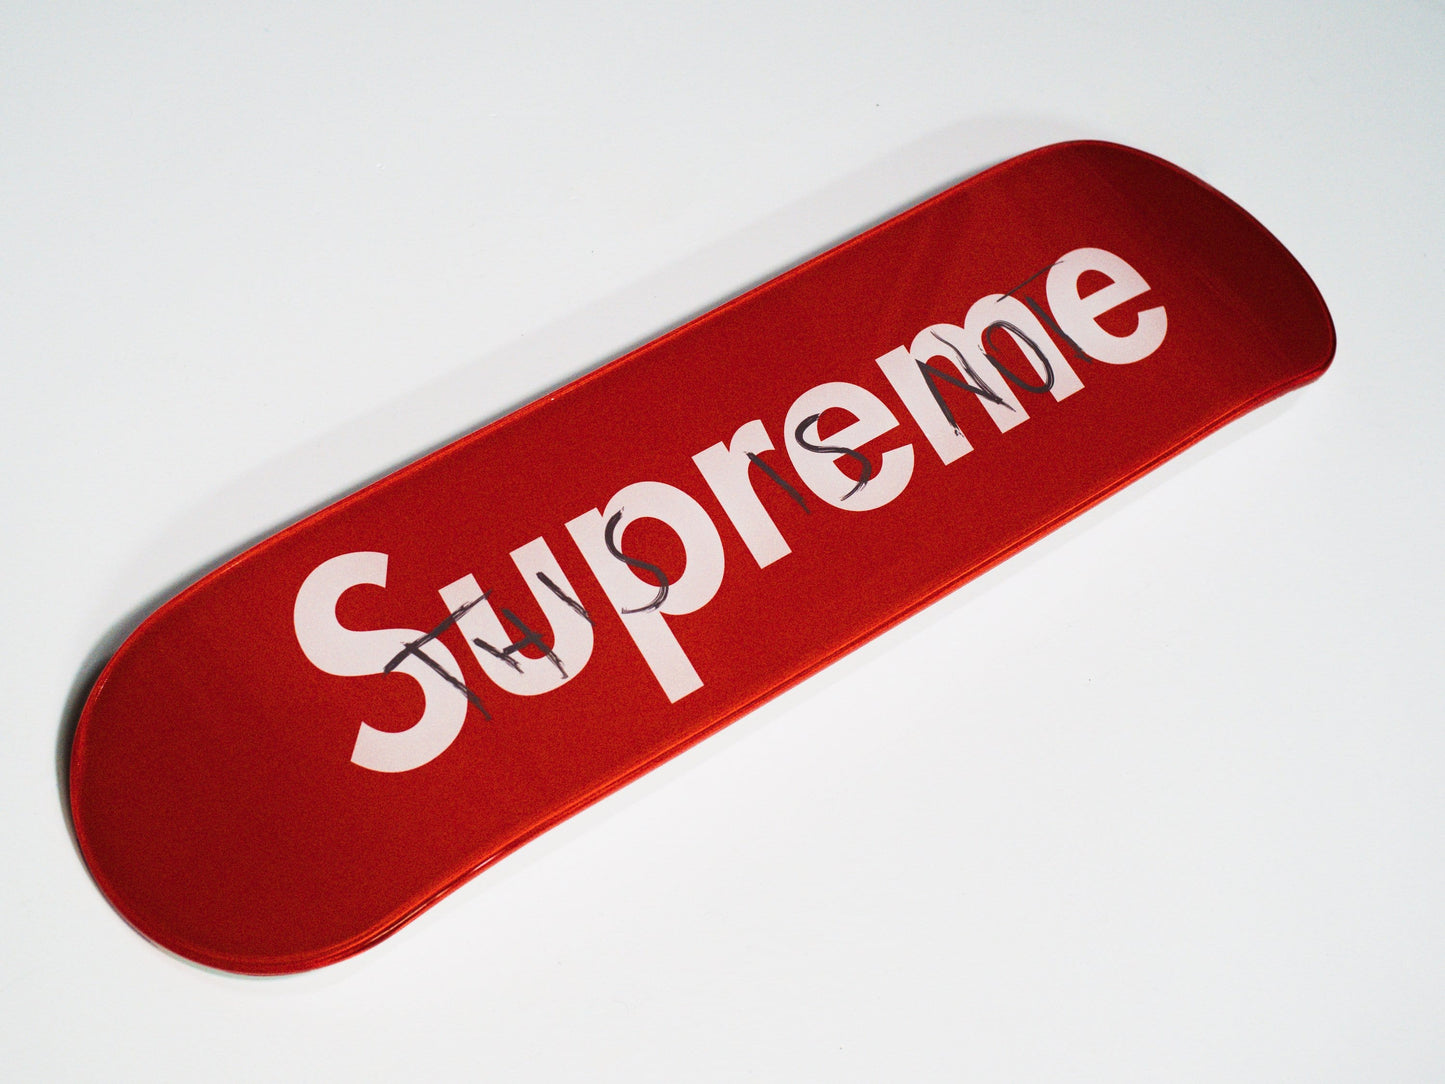 "this is not Supreme" -Red